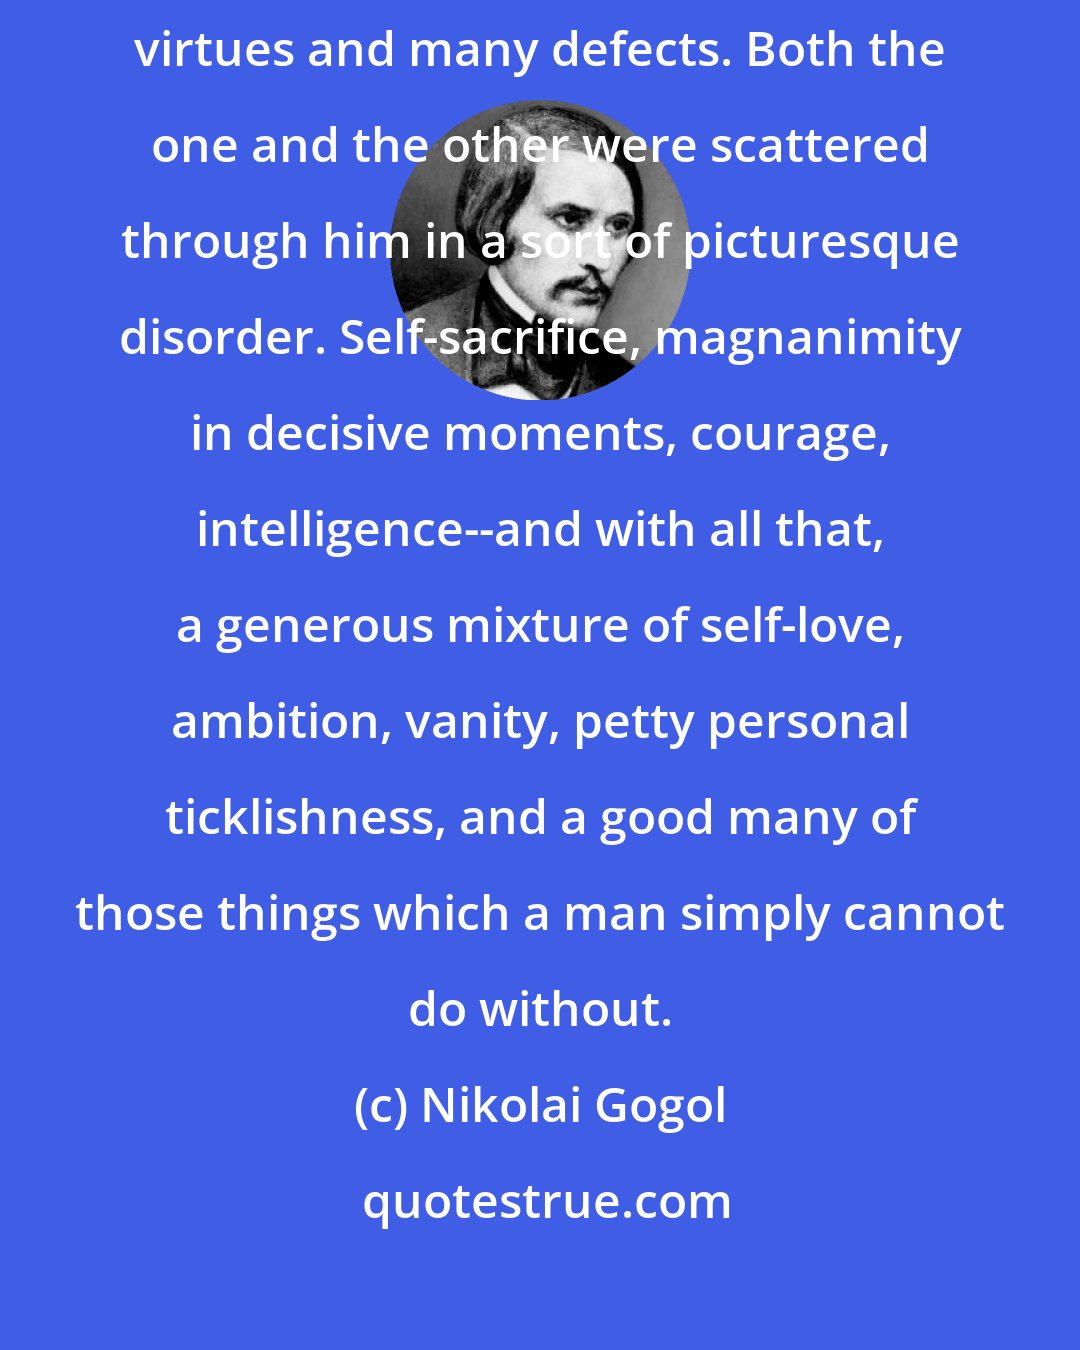 Nikolai Gogol: Like all of us sinners, General Betrishchev was endowed with many virtues and many defects. Both the one and the other were scattered through him in a sort of picturesque disorder. Self-sacrifice, magnanimity in decisive moments, courage, intelligence--and with all that, a generous mixture of self-love, ambition, vanity, petty personal ticklishness, and a good many of those things which a man simply cannot do without.